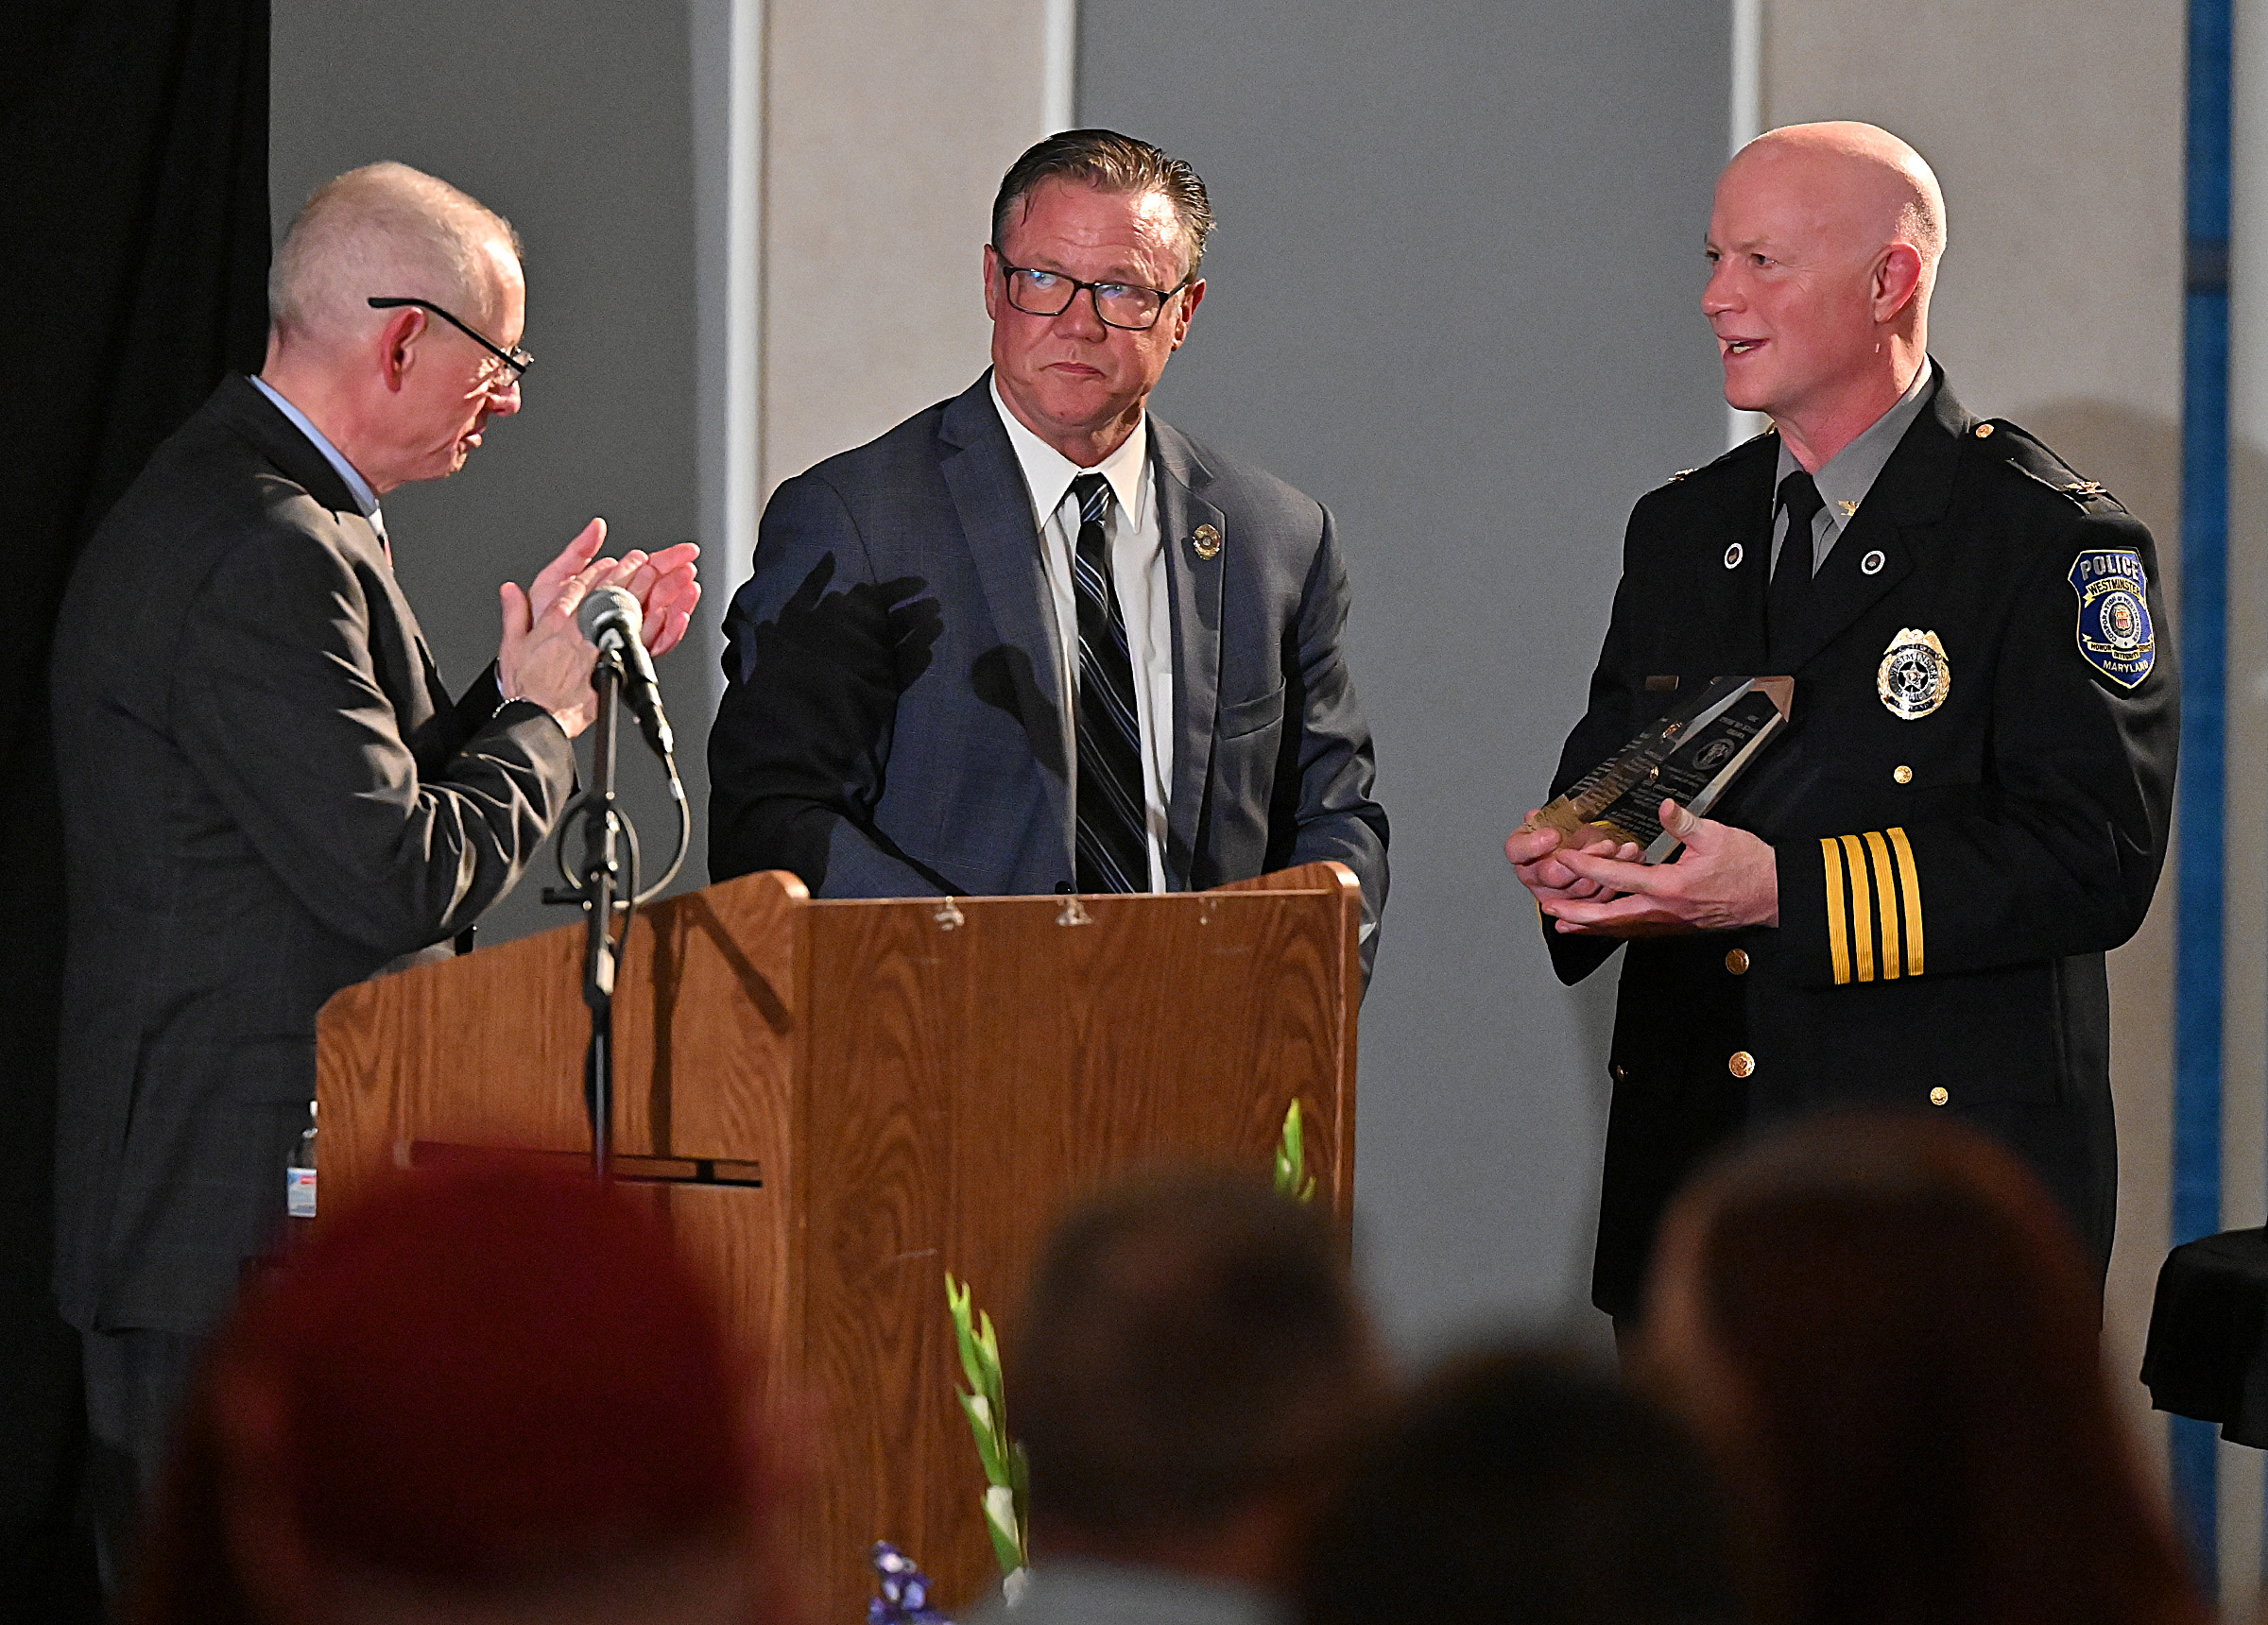 Westminster Chief Of Police, Thomas Ledwell, accepted the "Message of Hope Award" on behalf of Lt. Tim Rife at the 9th Annual Drug Overdose and Prevention Vigil Tuesday at Portico at St. John in Westminster. (Jeffrey F. Bill/Staff photo)